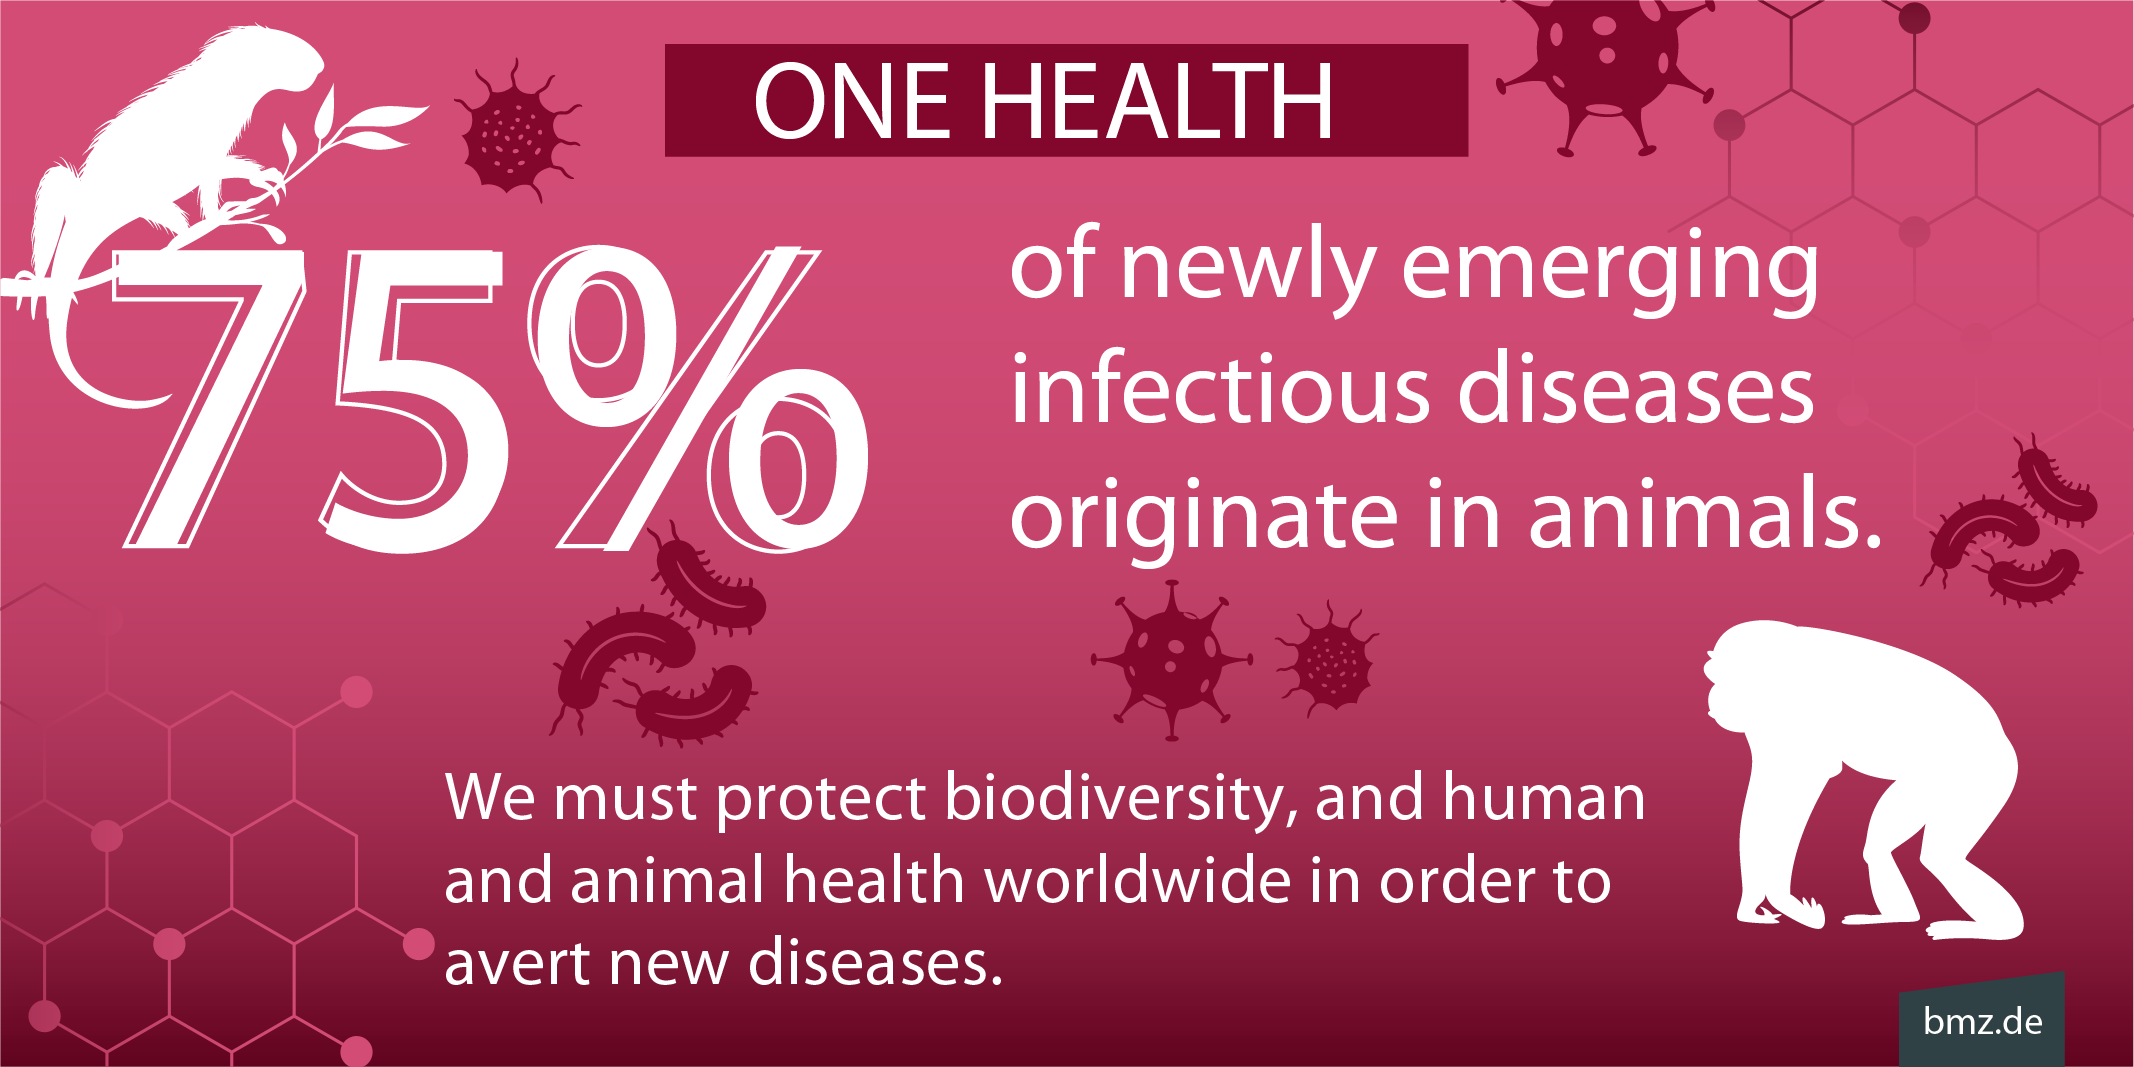 One Health: 75 per cent of newly emerging infectious diseases originate in animals. We must protect biodiversity, and human and animal health worldwide in order to avert new diseases.